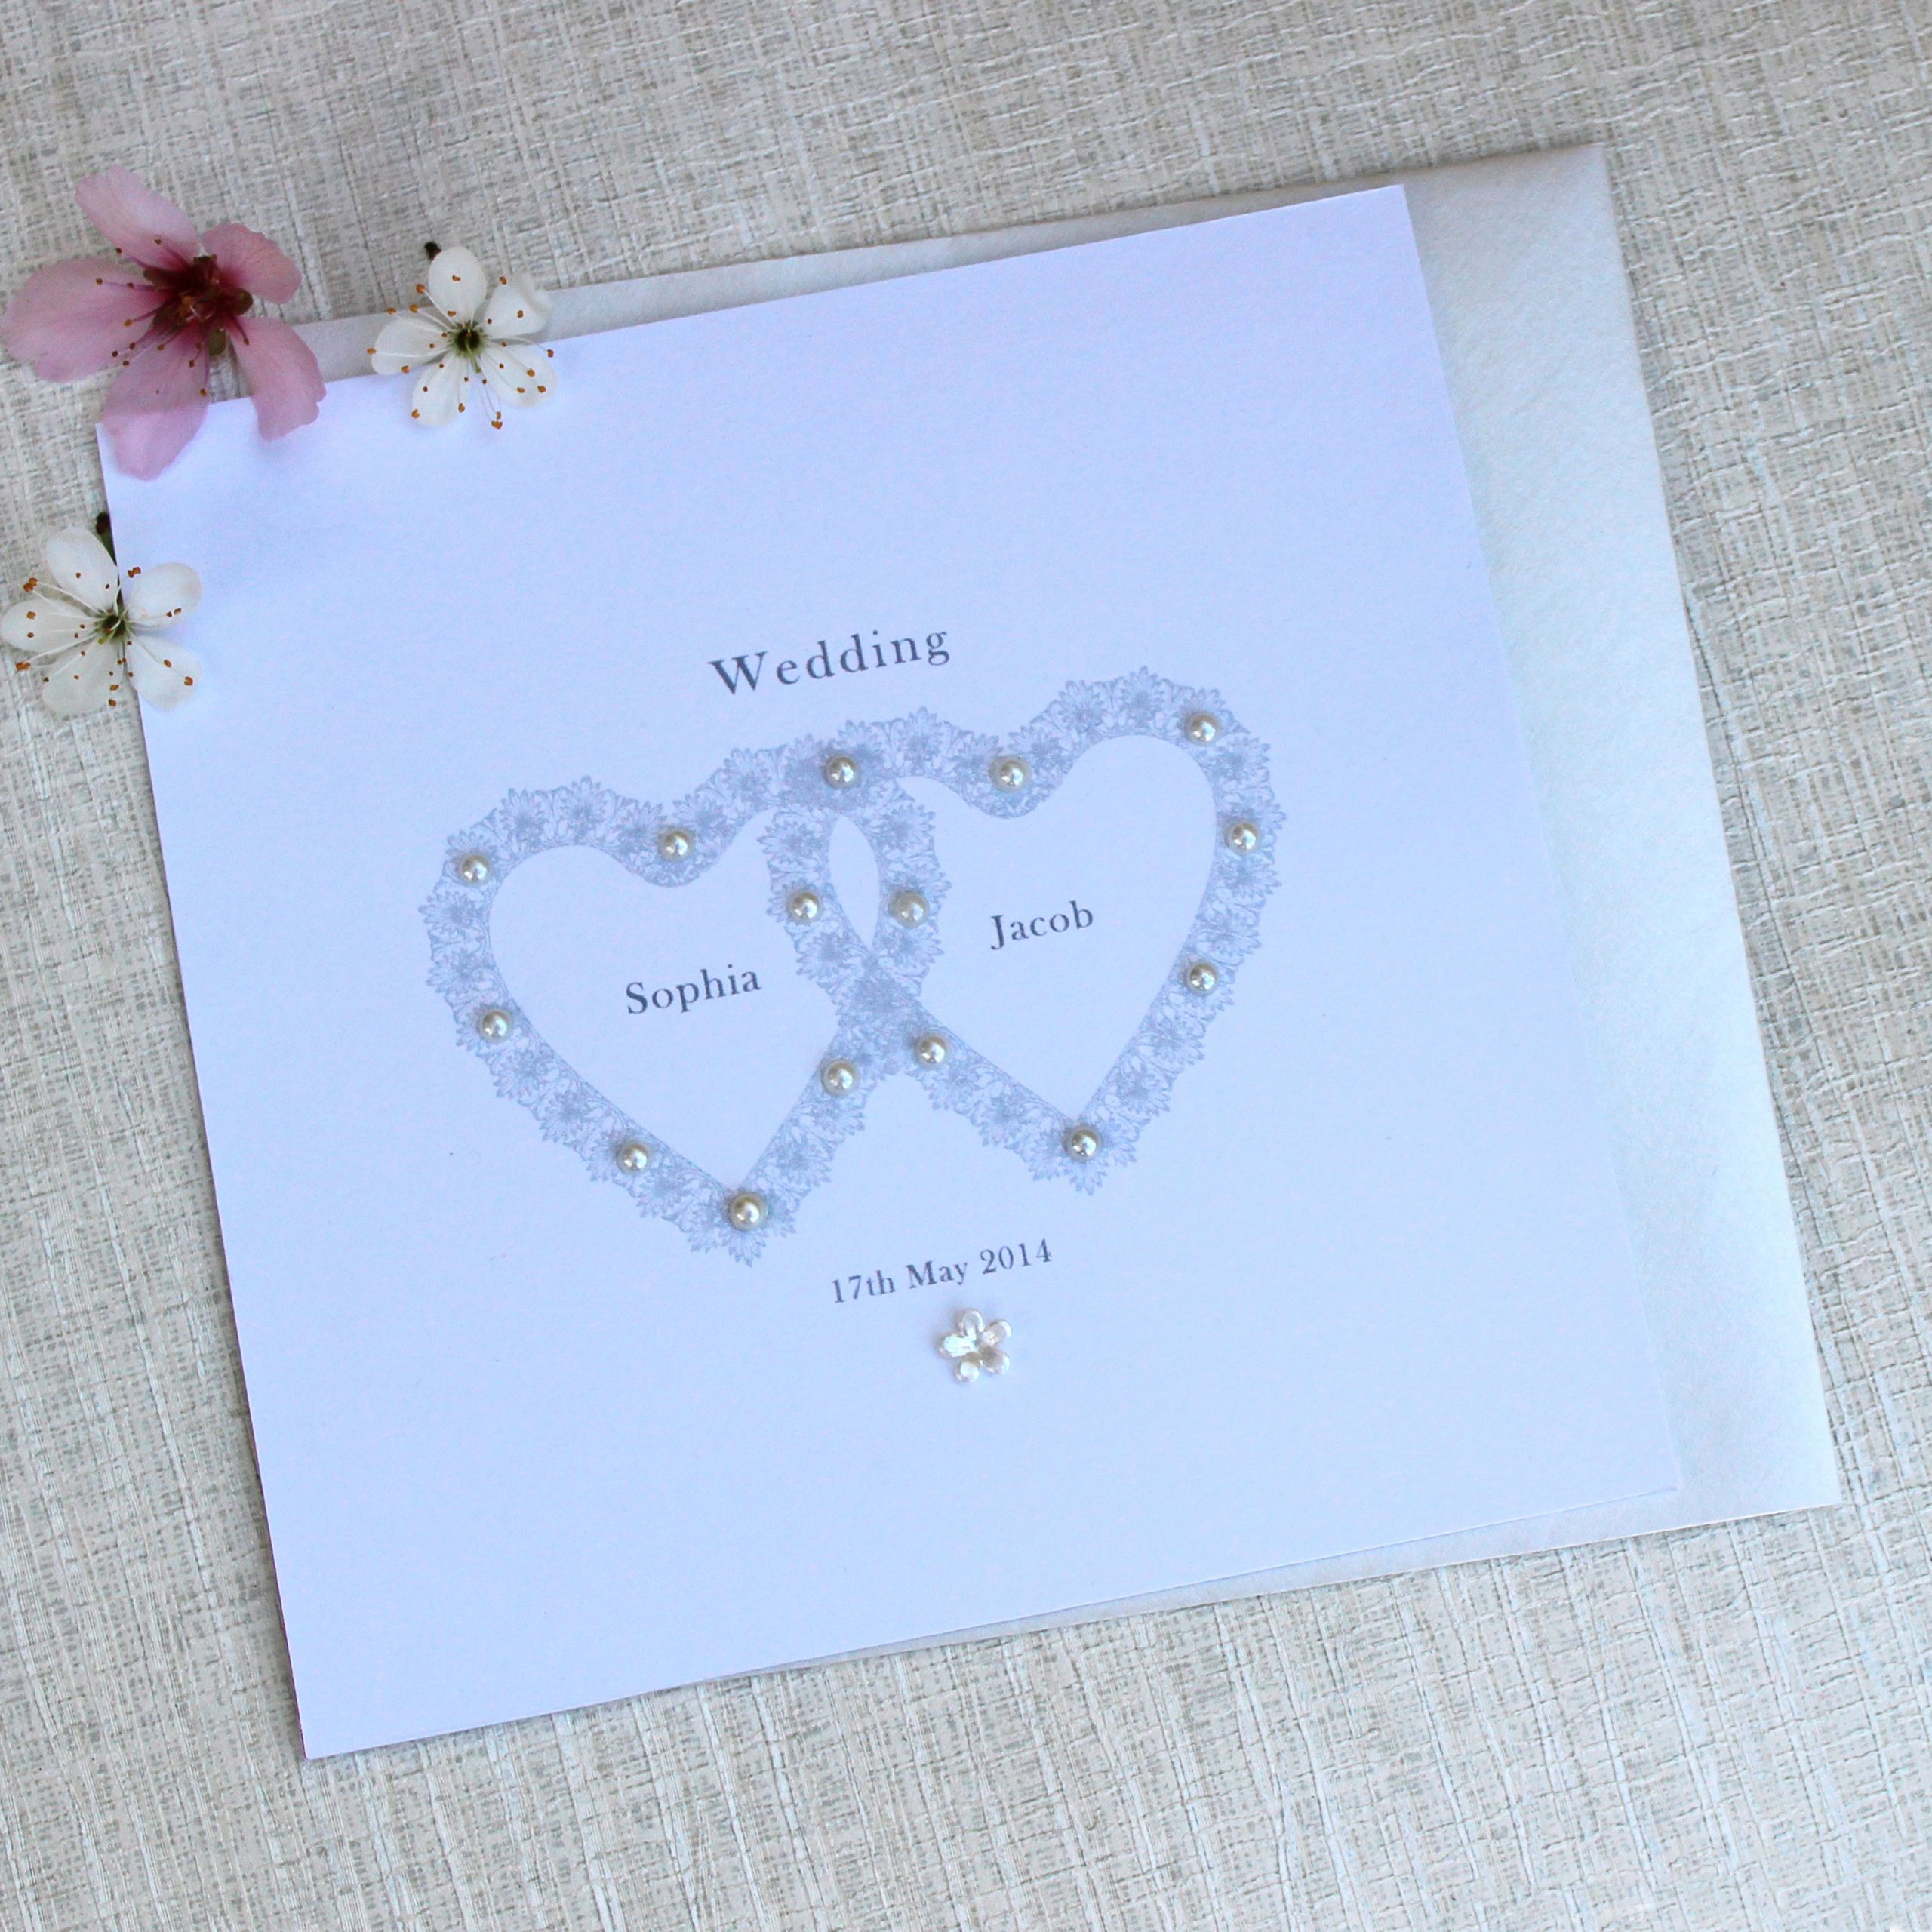 Heart Wedding Invitations
 Entwined Hearts Wedding Invitations Sweet Dimple